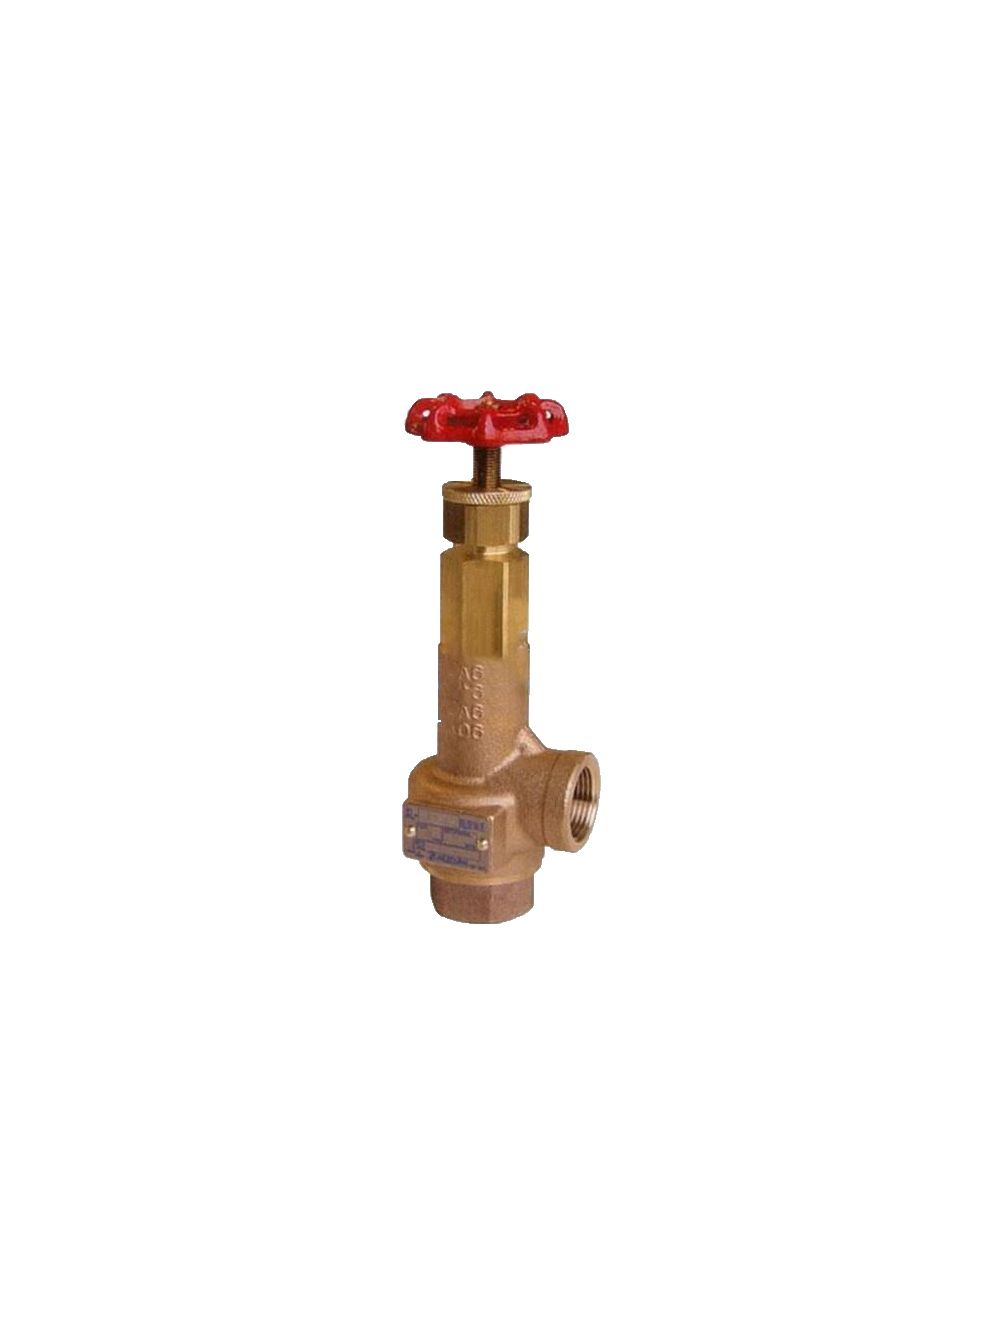 New In stock for sale, Yoshitake Safety Valve AL-260R(DN25)